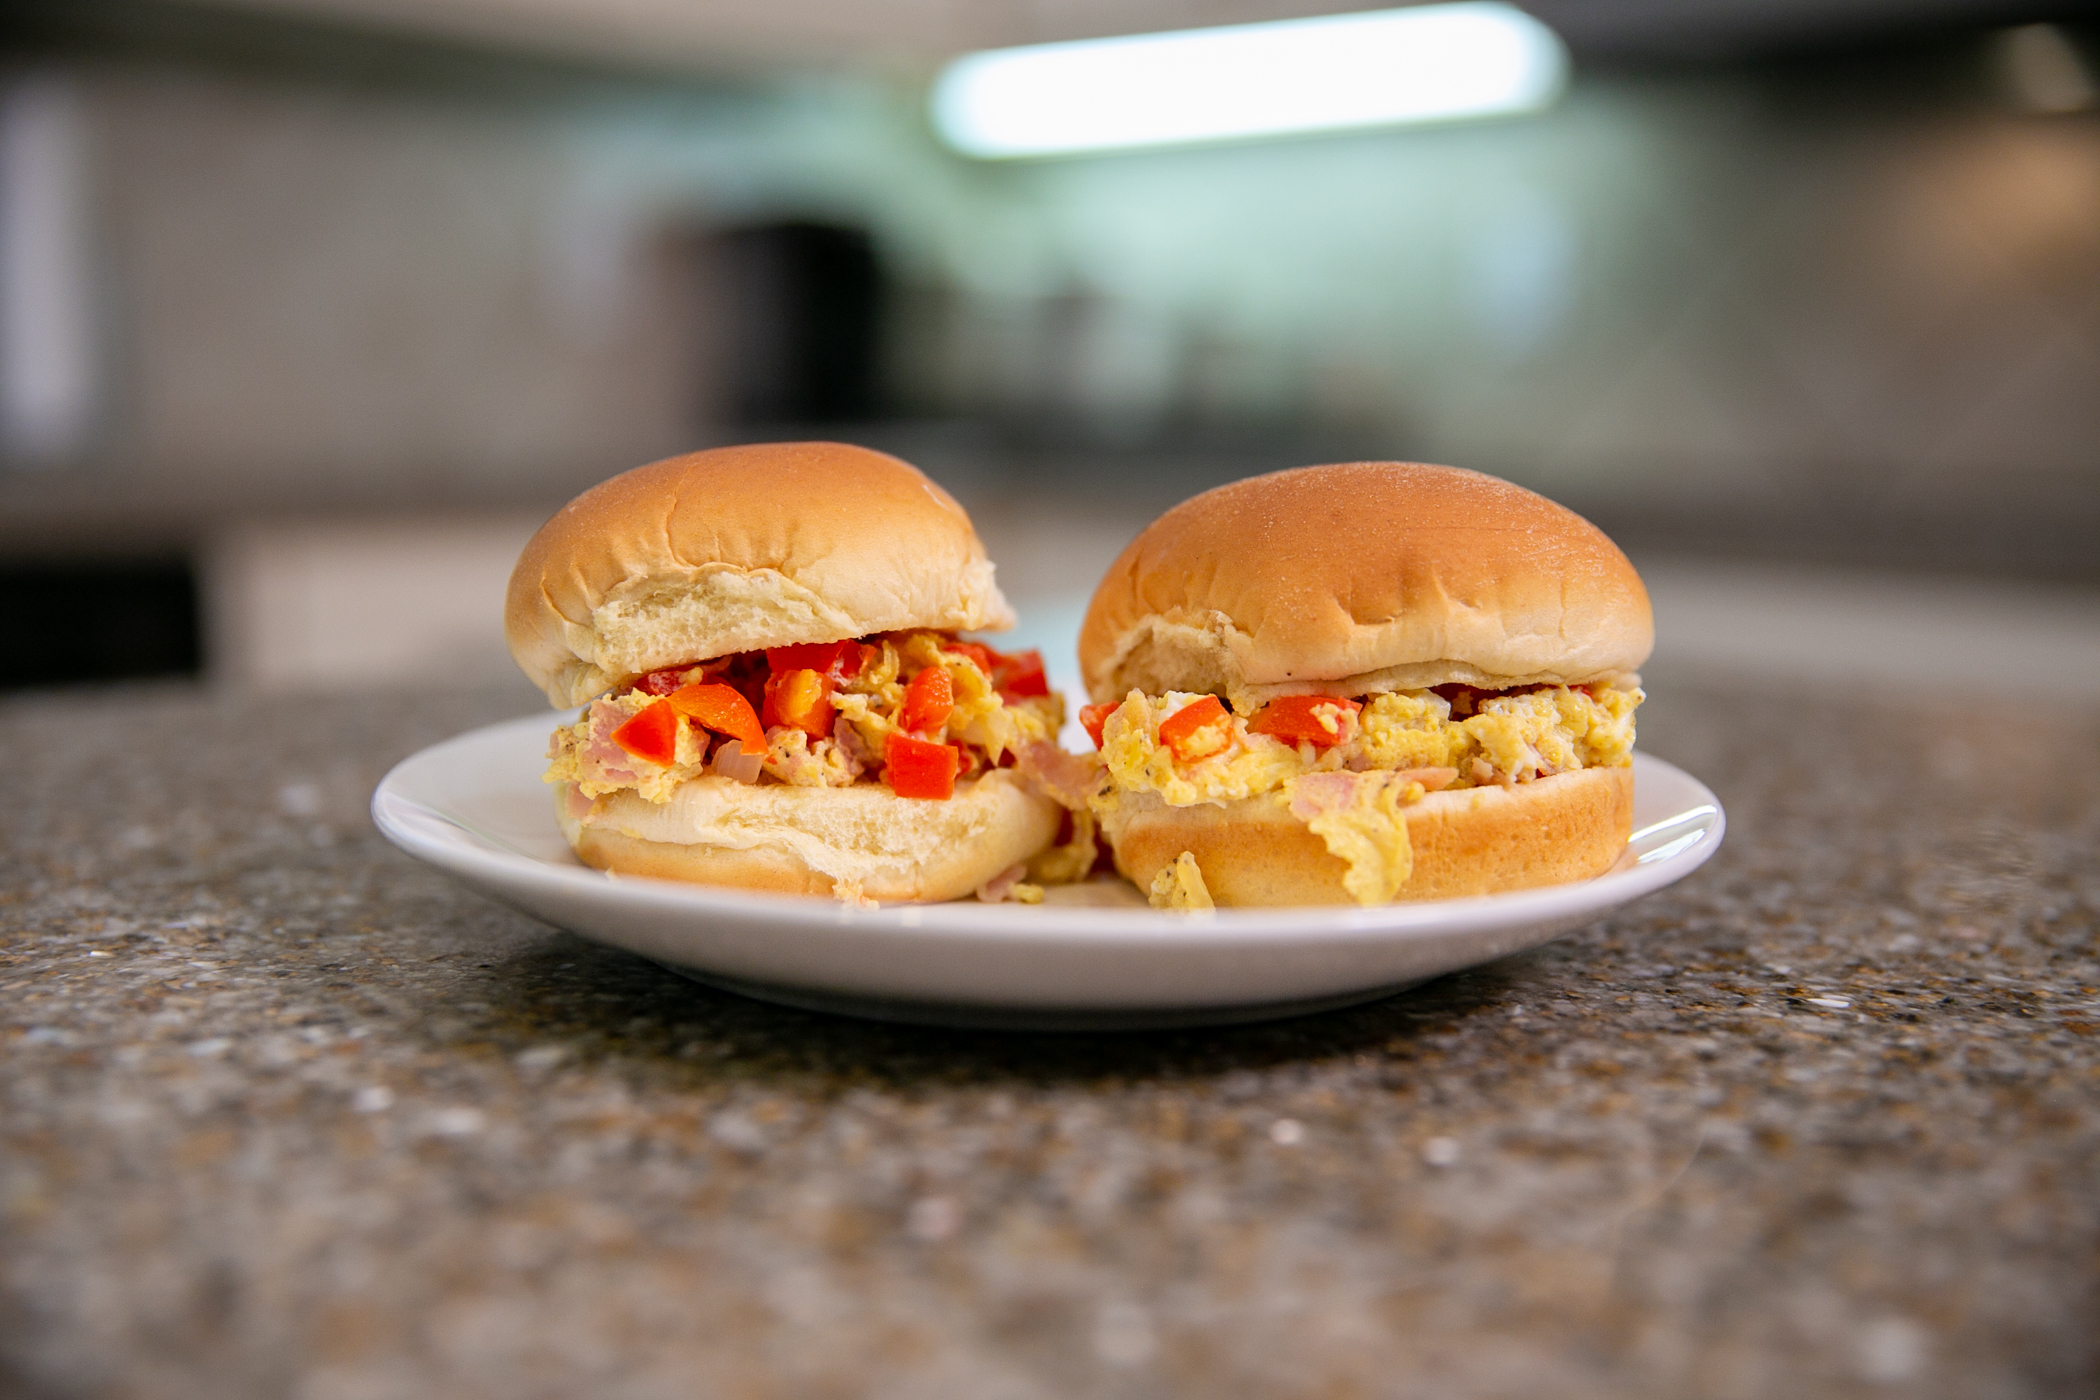 Two Microwave Denver Scramble Sliders sit on a plate on a kitchen countertop.